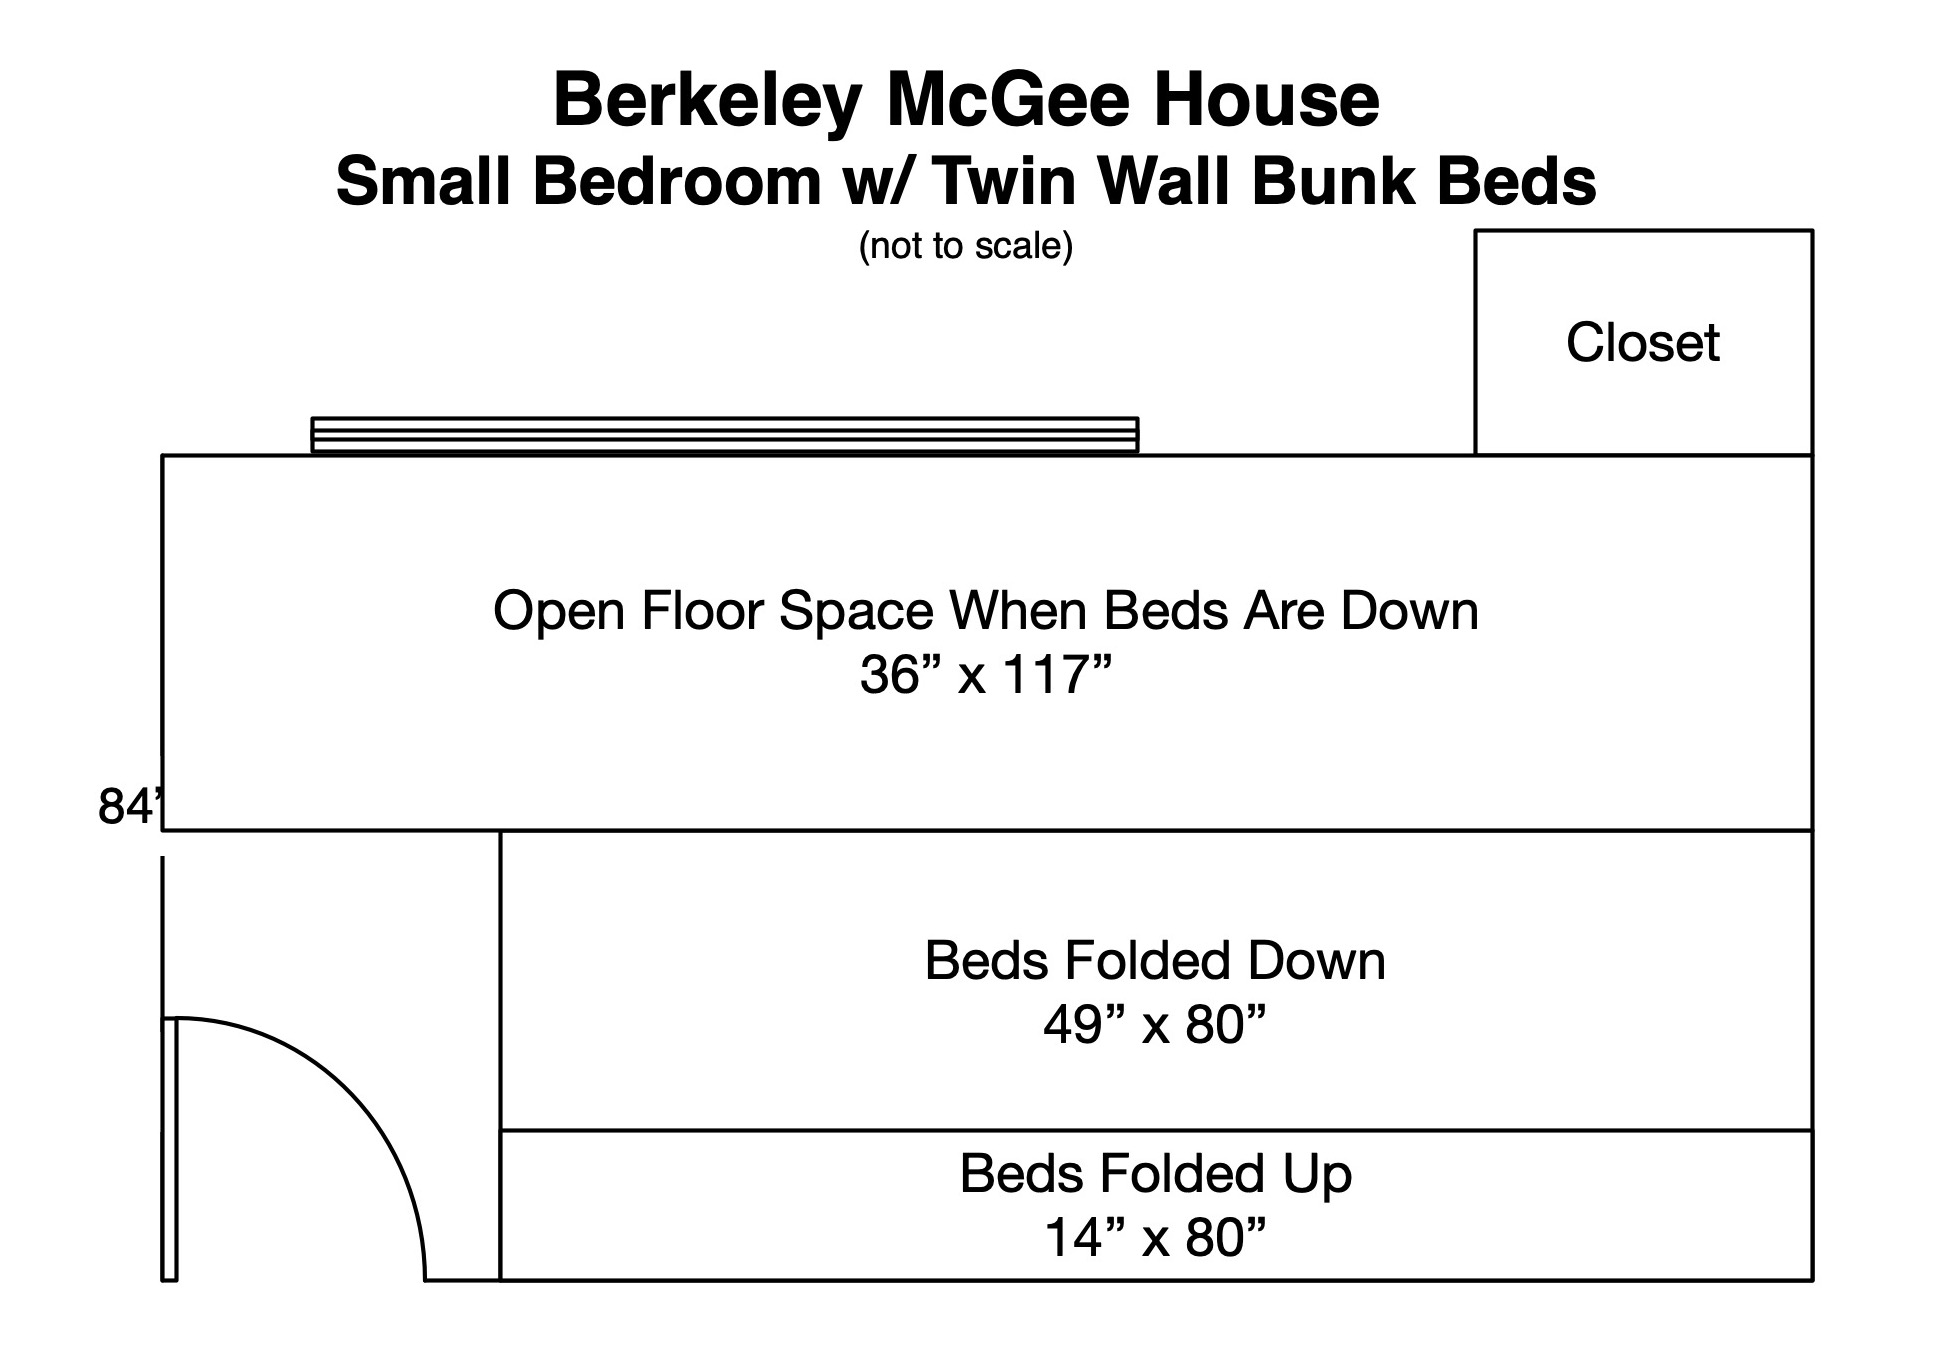 McGee Hpuse Second Bedroom Layout